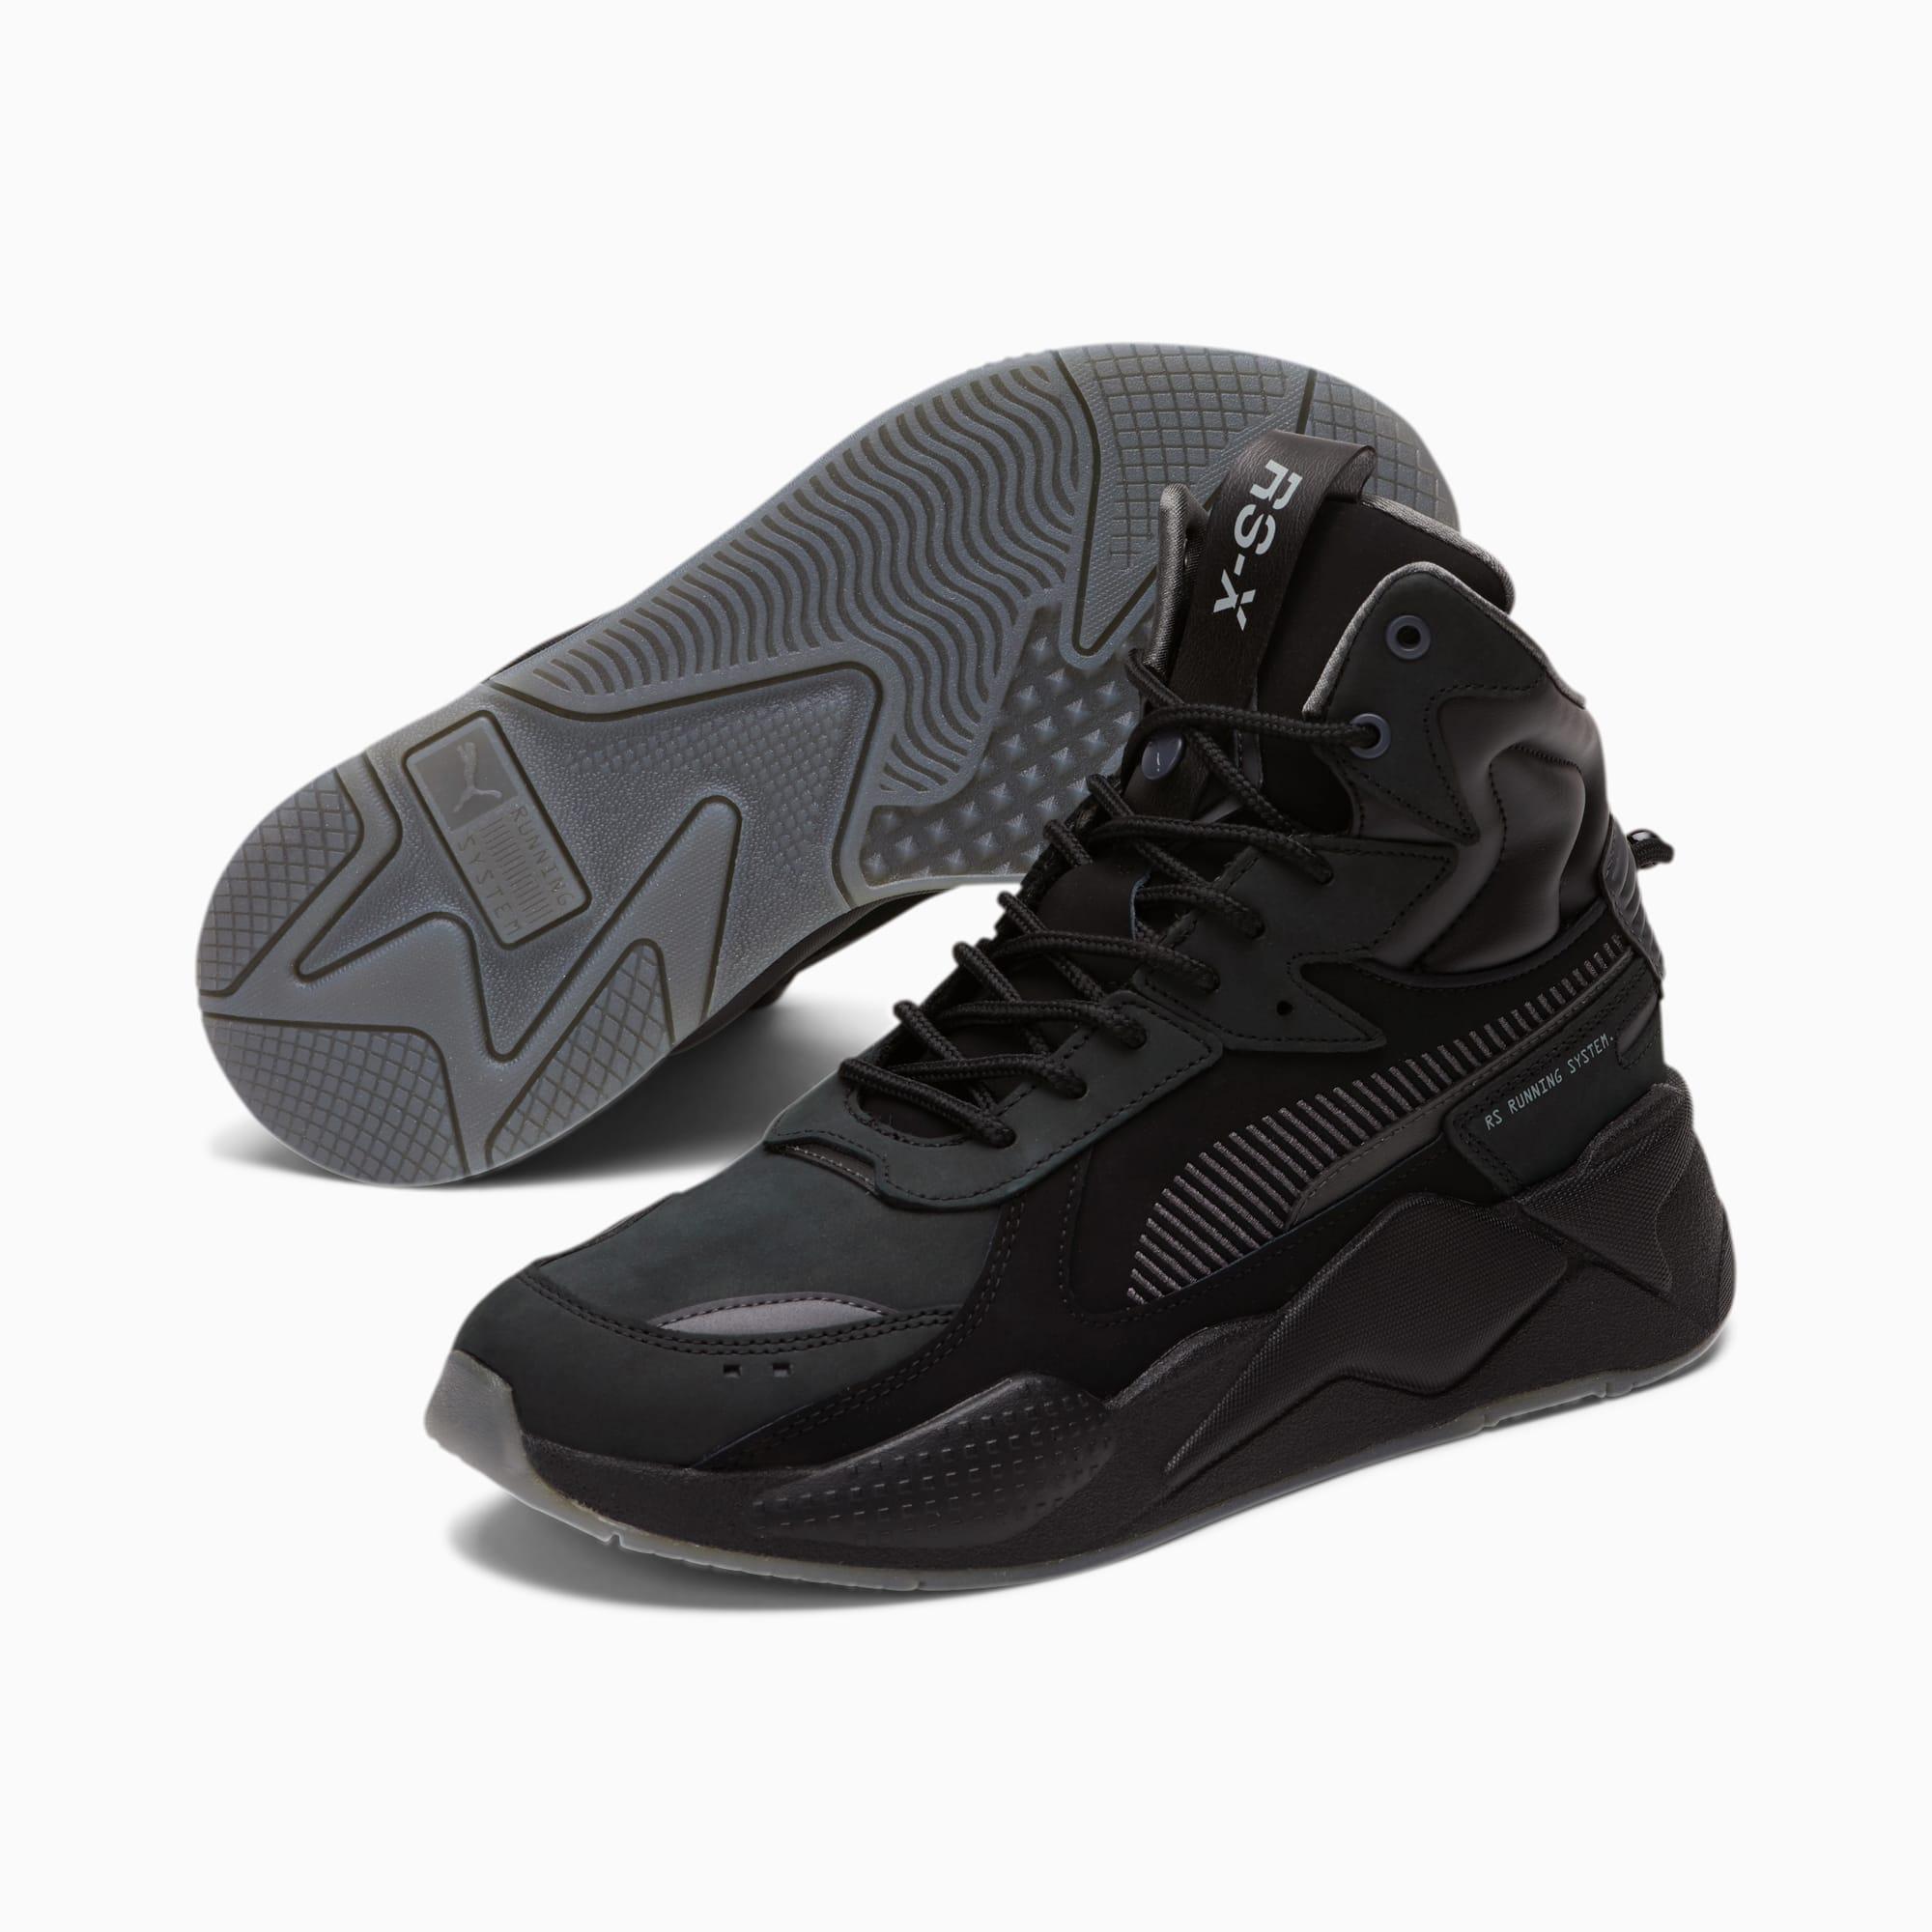 PUMA Lace Rs-x Mid Sneakers in Black for Men - Lyst